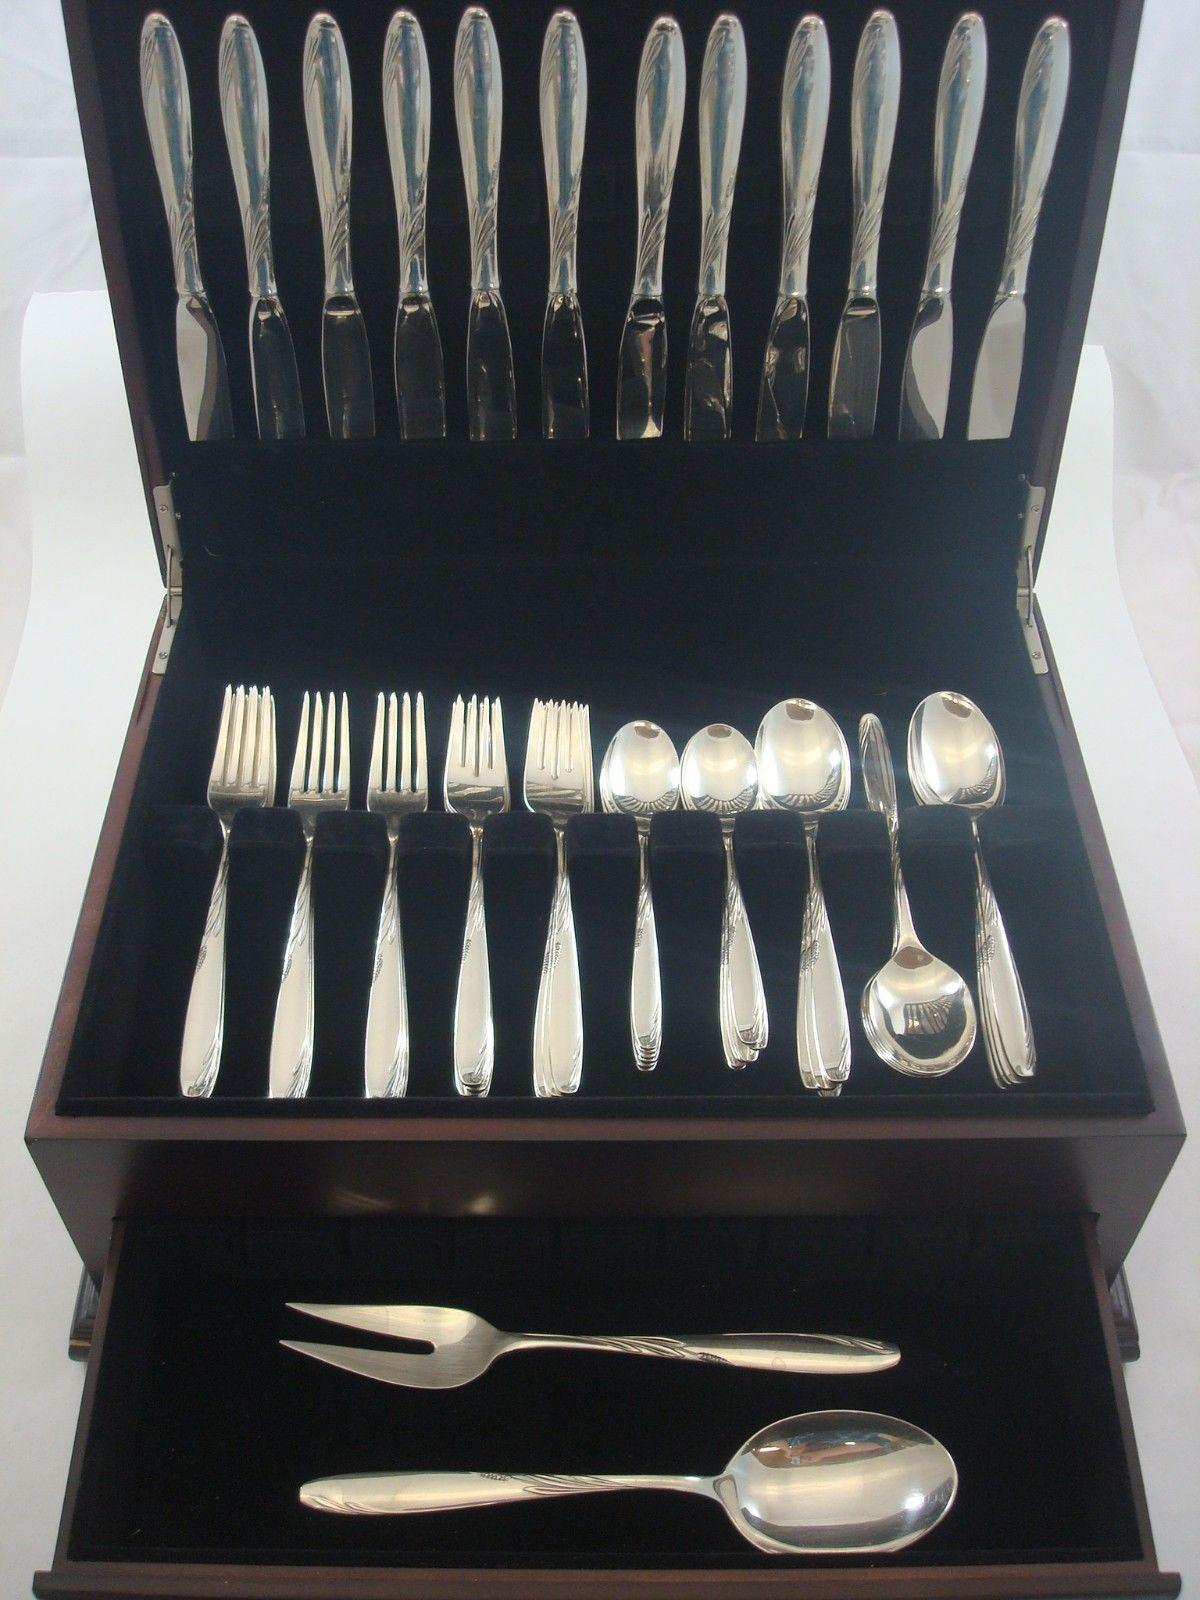 Mid-Century Modern Willow by Gorham sterling silver circa 1954 flatware set of 62 pieces. This set includes:

12 knives, 9 1/4